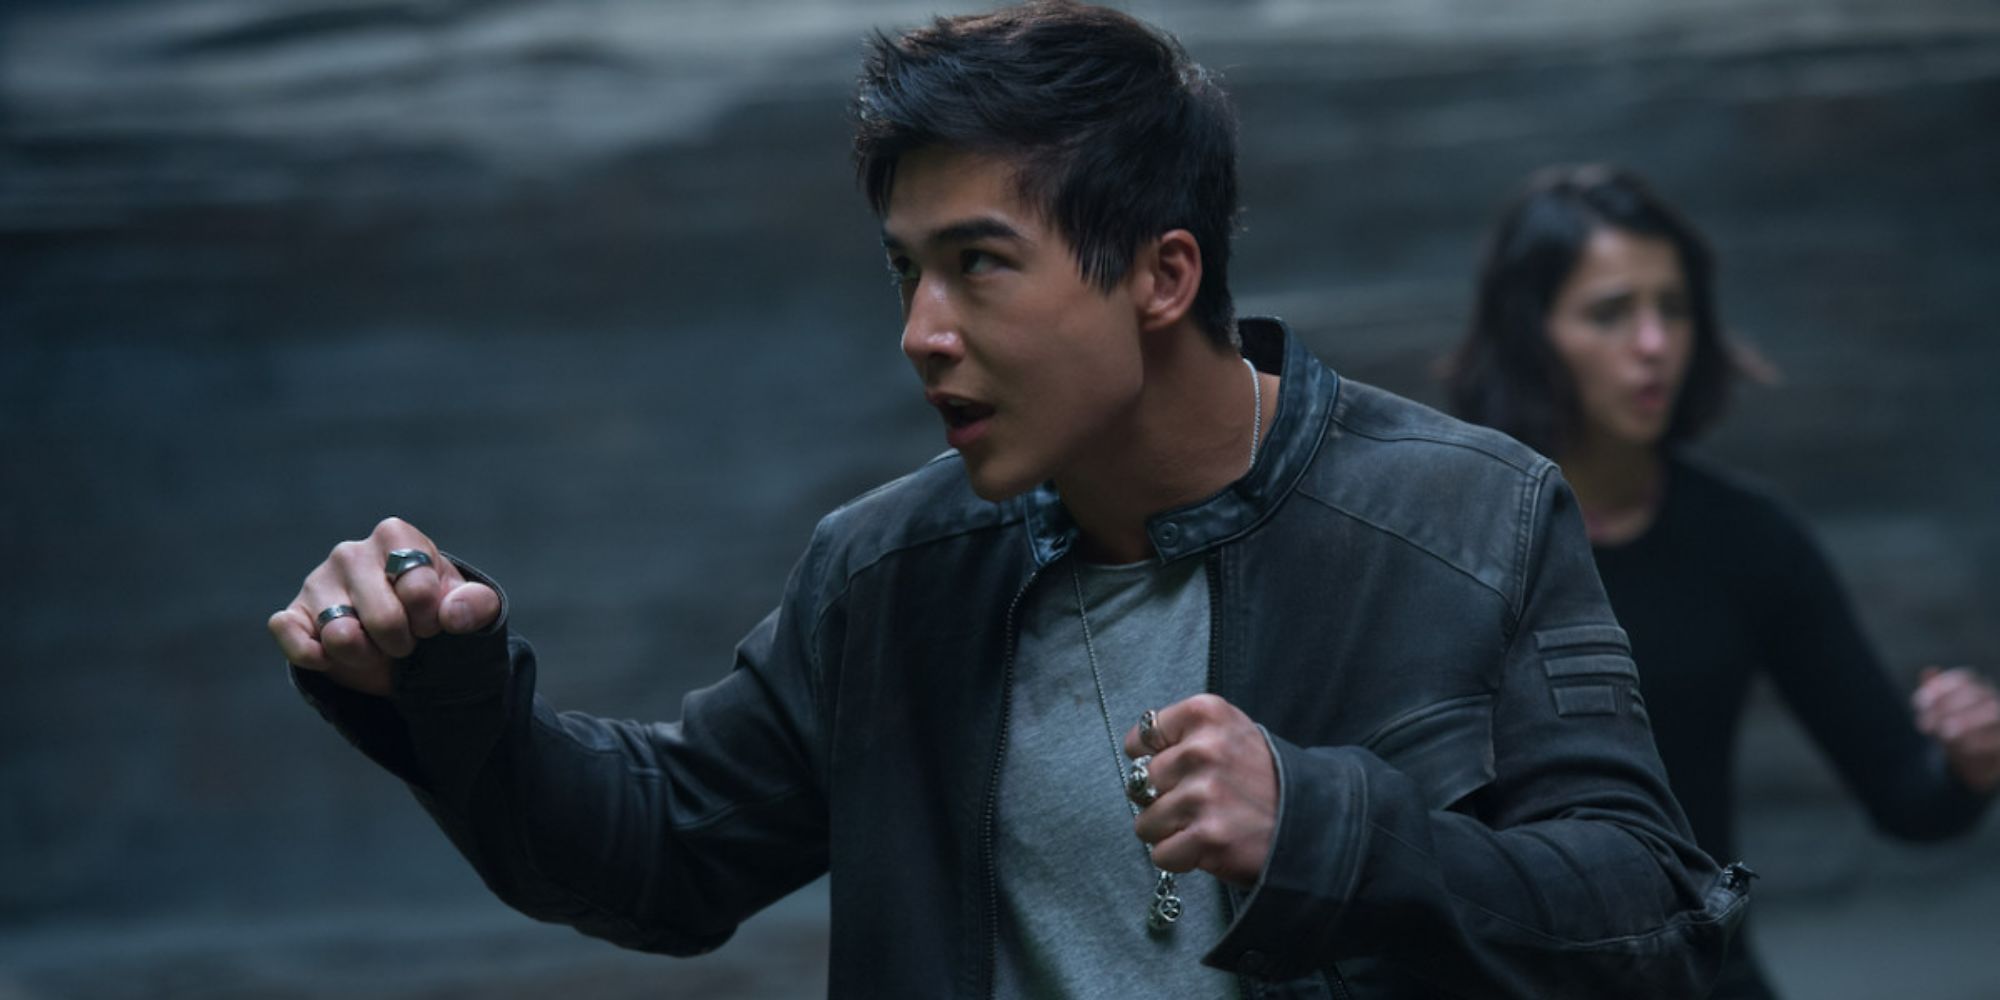 Ludi Lin as Zack getting ready to fight in Power Rangers (2017)